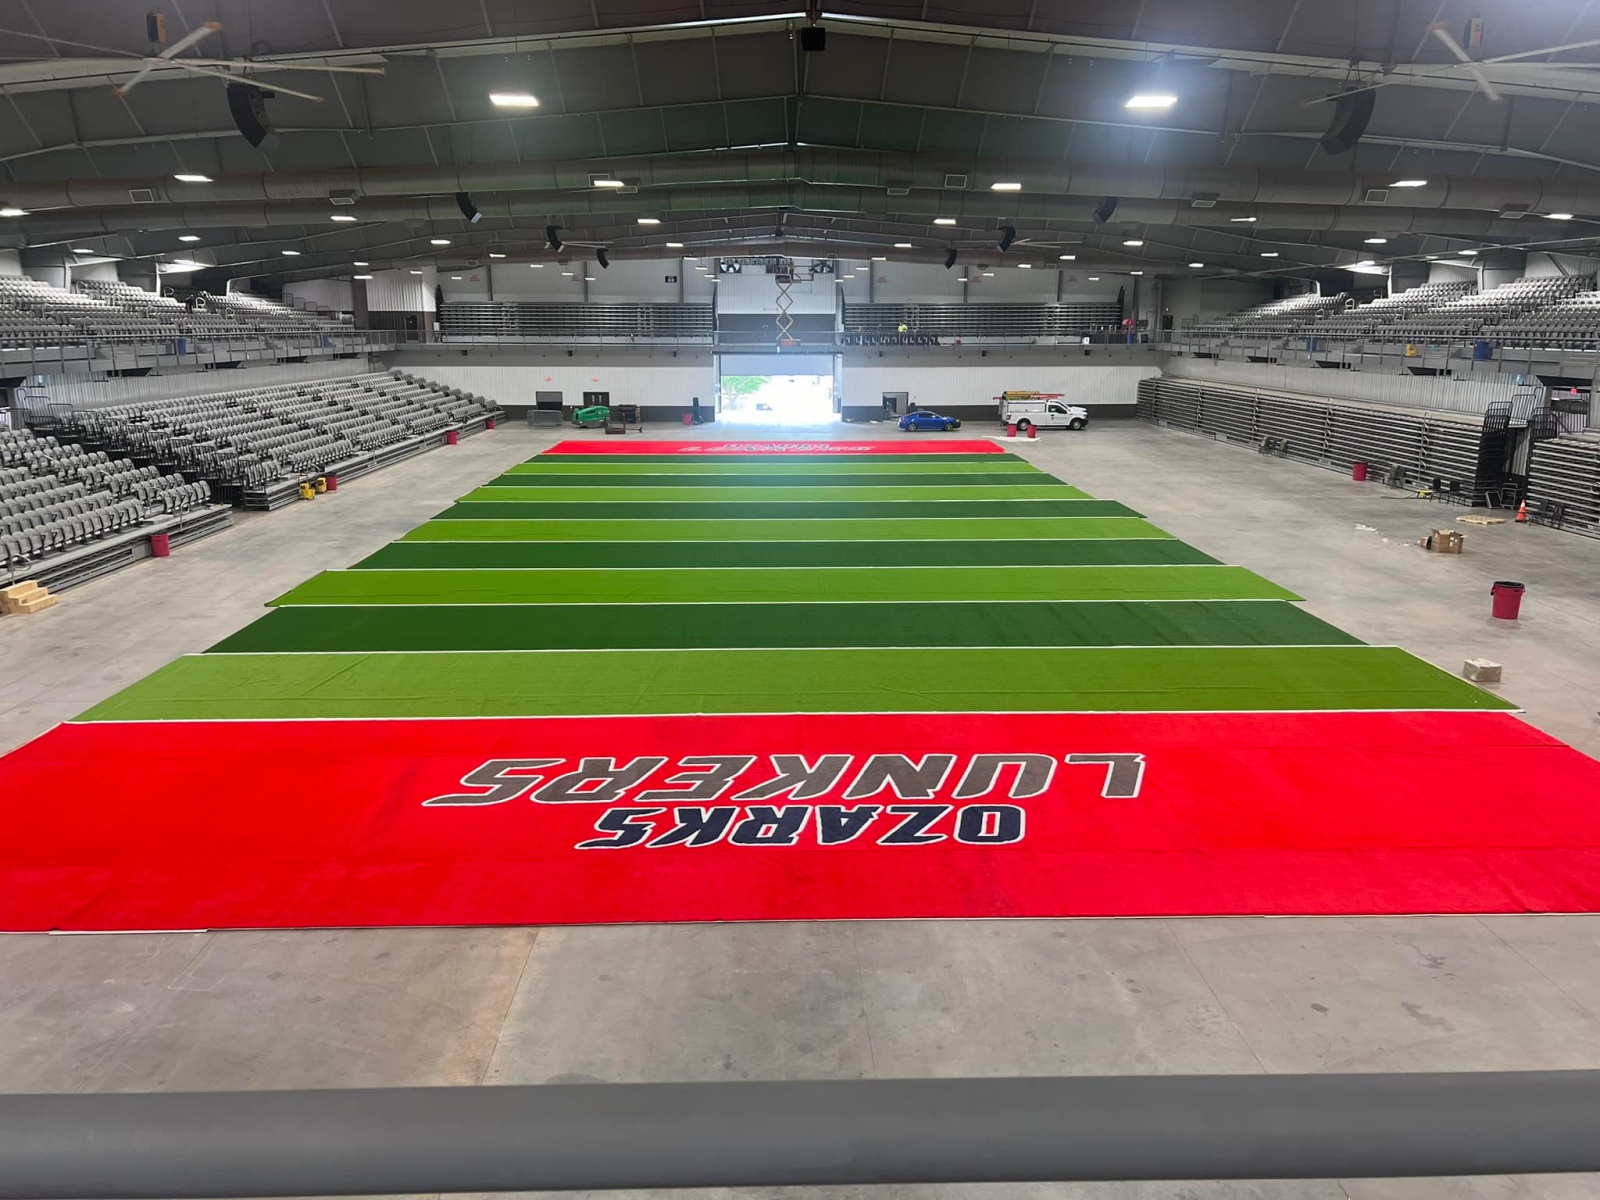 The field at Wilson Logistics Arena. The end zones are red with the words "Ozarks Lunkers" painted on them.